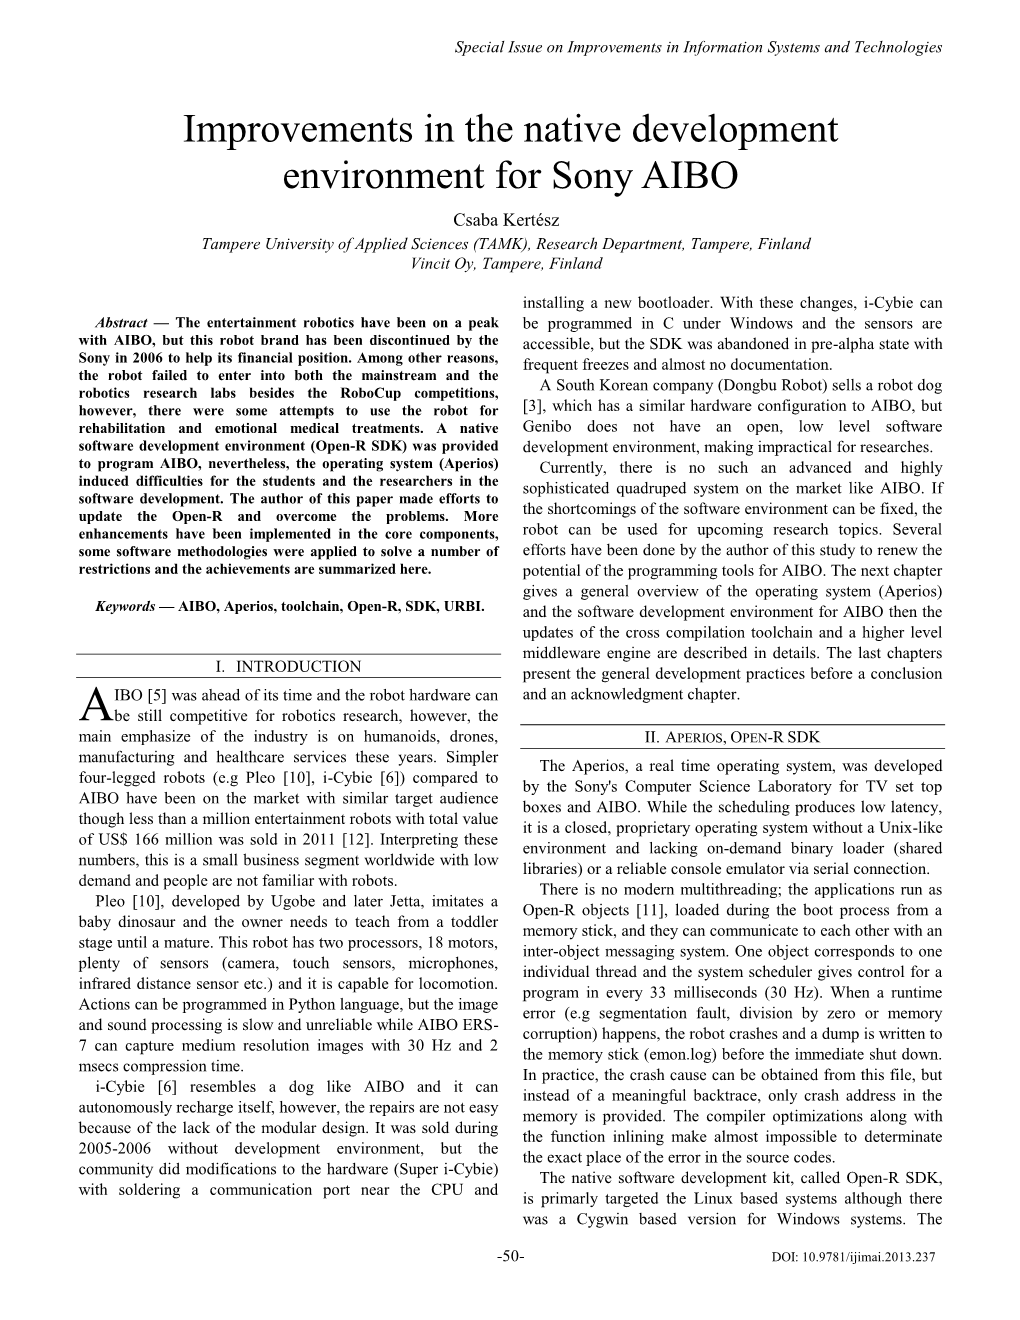 Improvements in the Native Development Environment for Sony AIBO